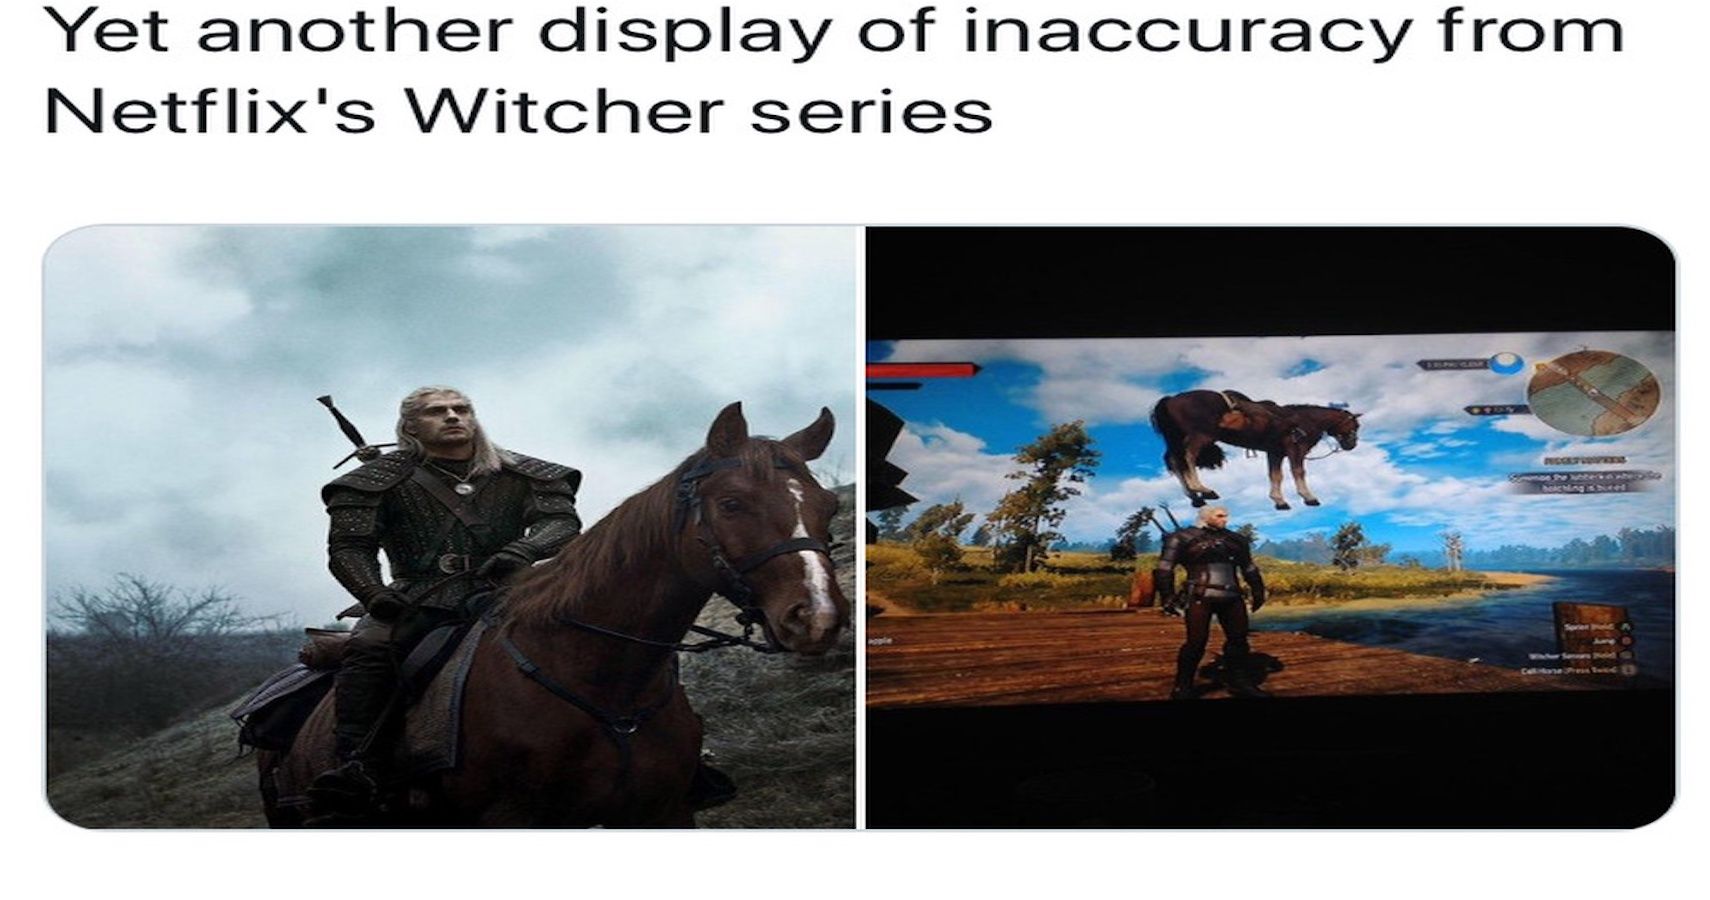 The Witcher 3: 10 Hilarious Roach Memes That Will Have You Cry Laughing